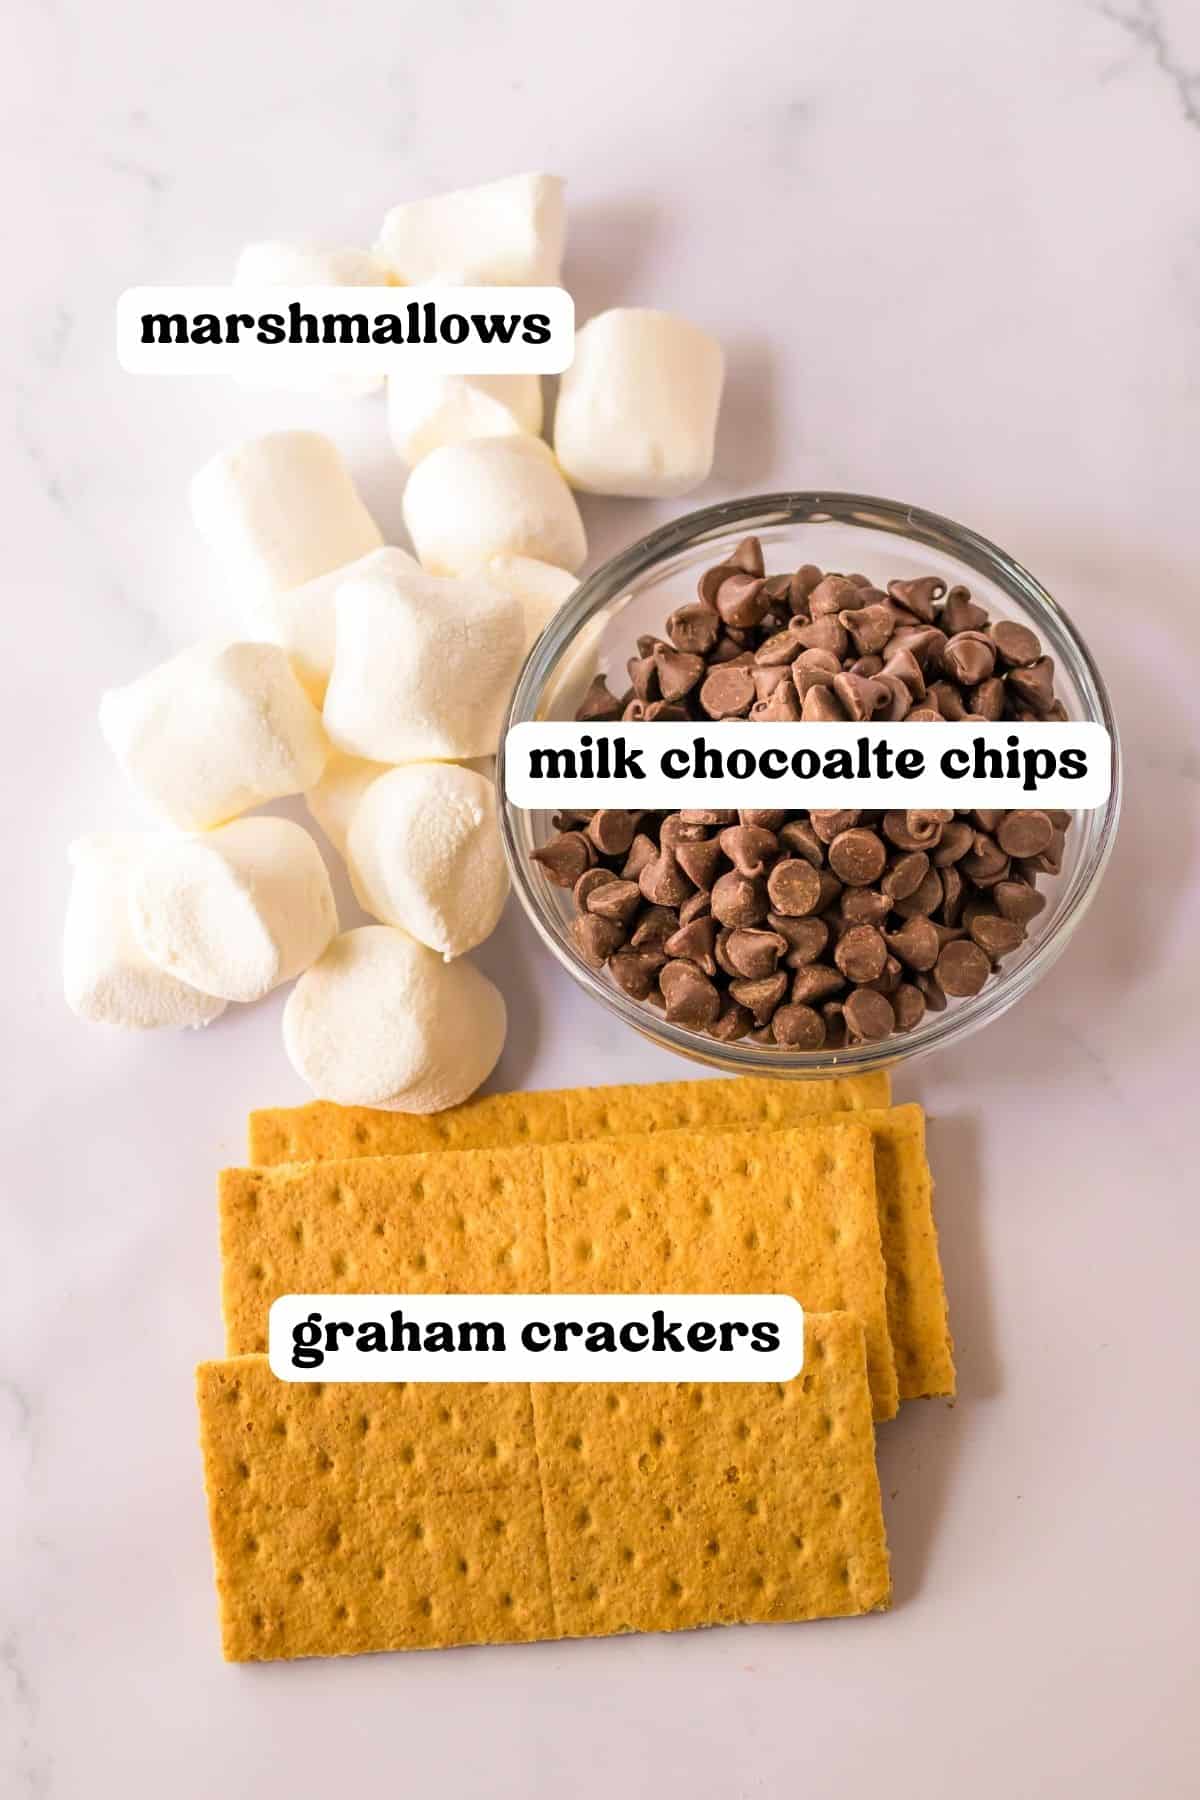 Marshmallows, milk chocolate chips, and graham crackers.